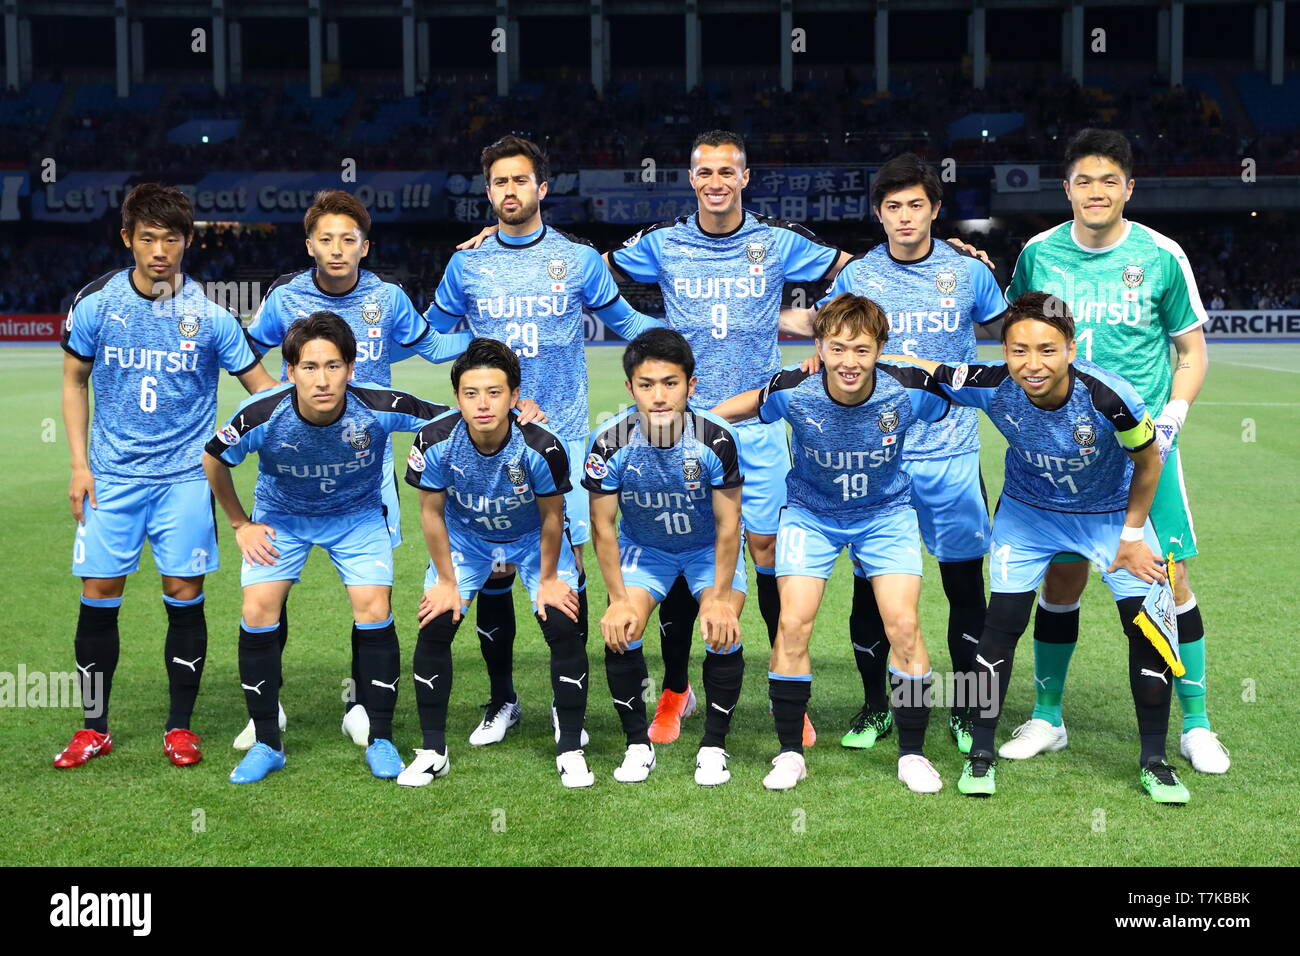 Kawasaki Frontale Team Group Line Up High Resolution Stock Photography And Images Alamy